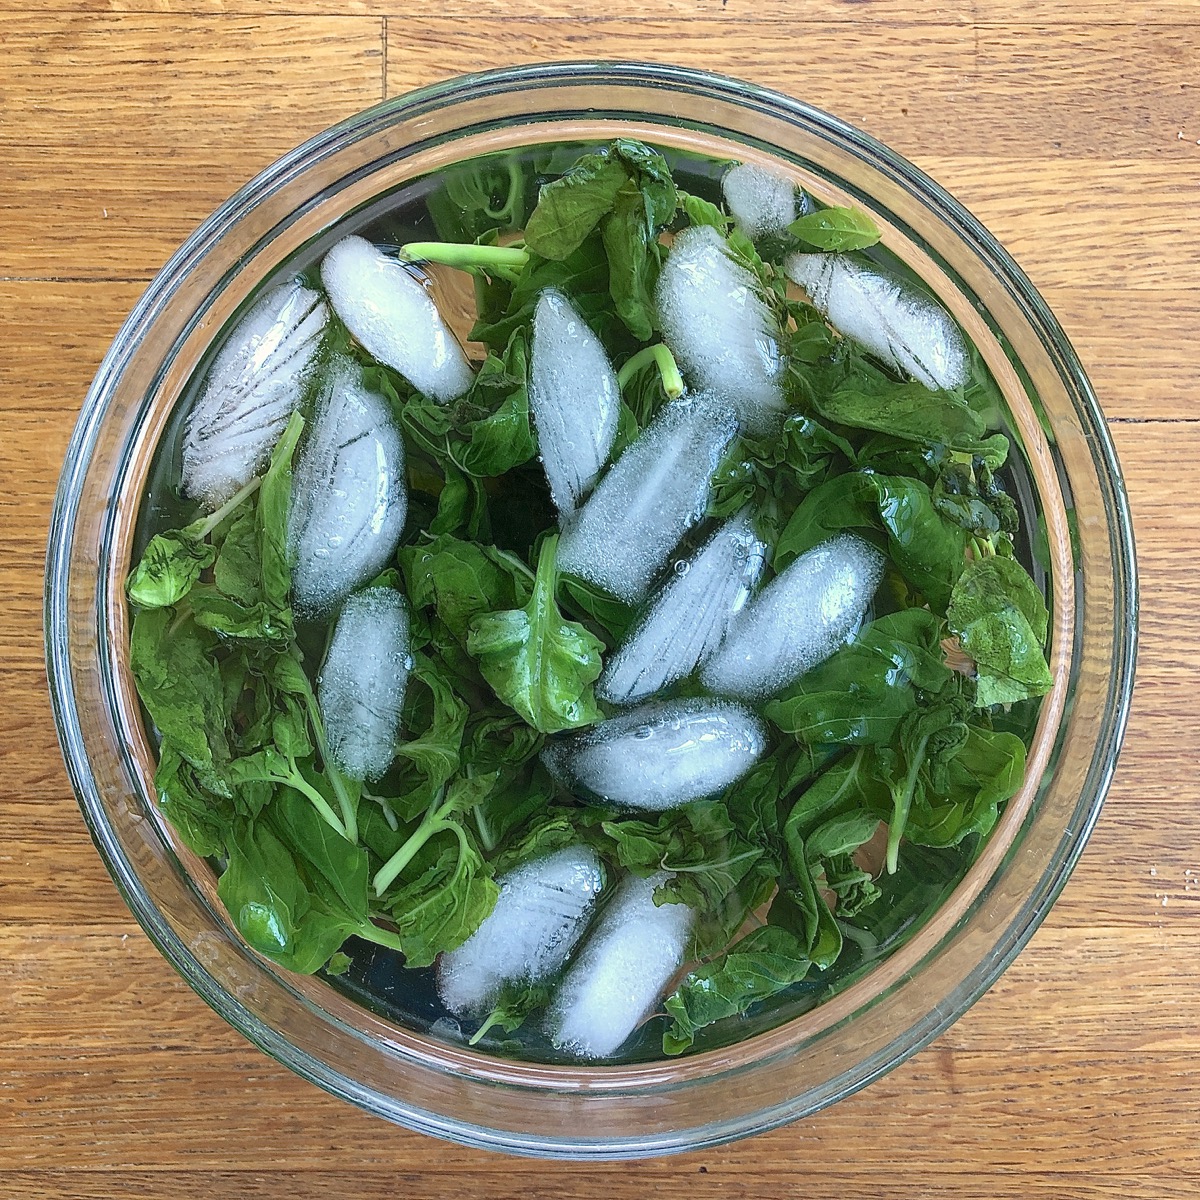 Blanched fresh basil leaves cooling in an ice water bath.